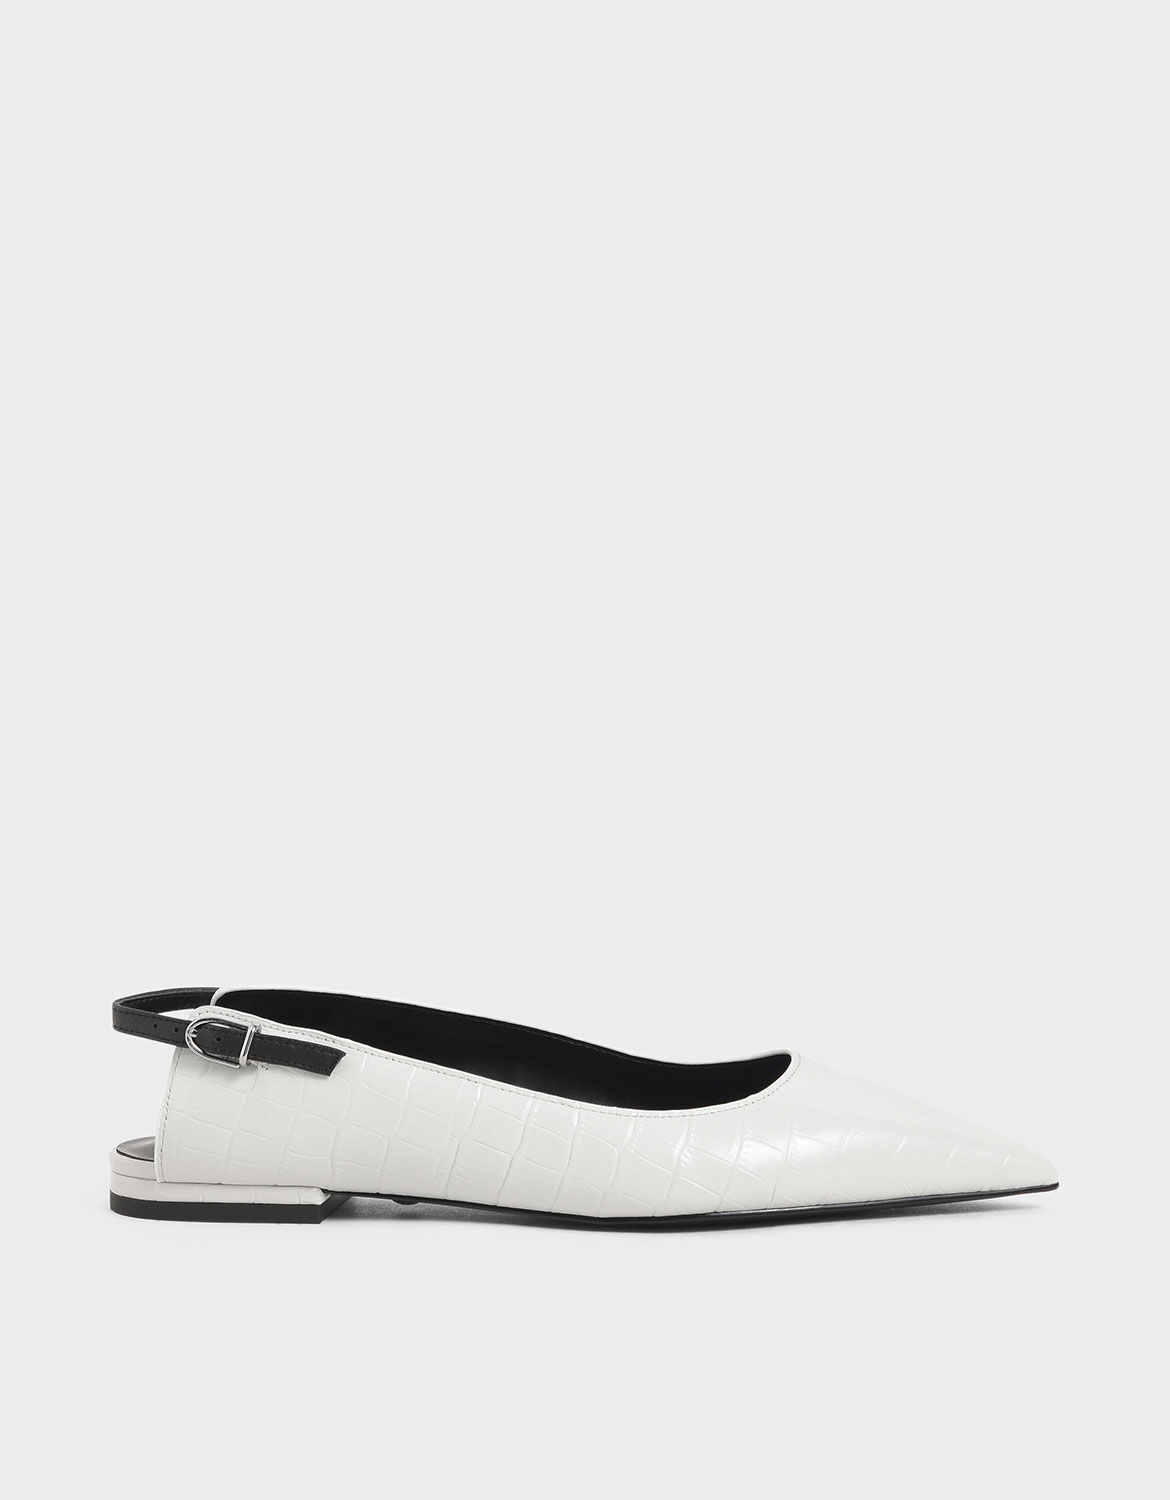 leather white flats